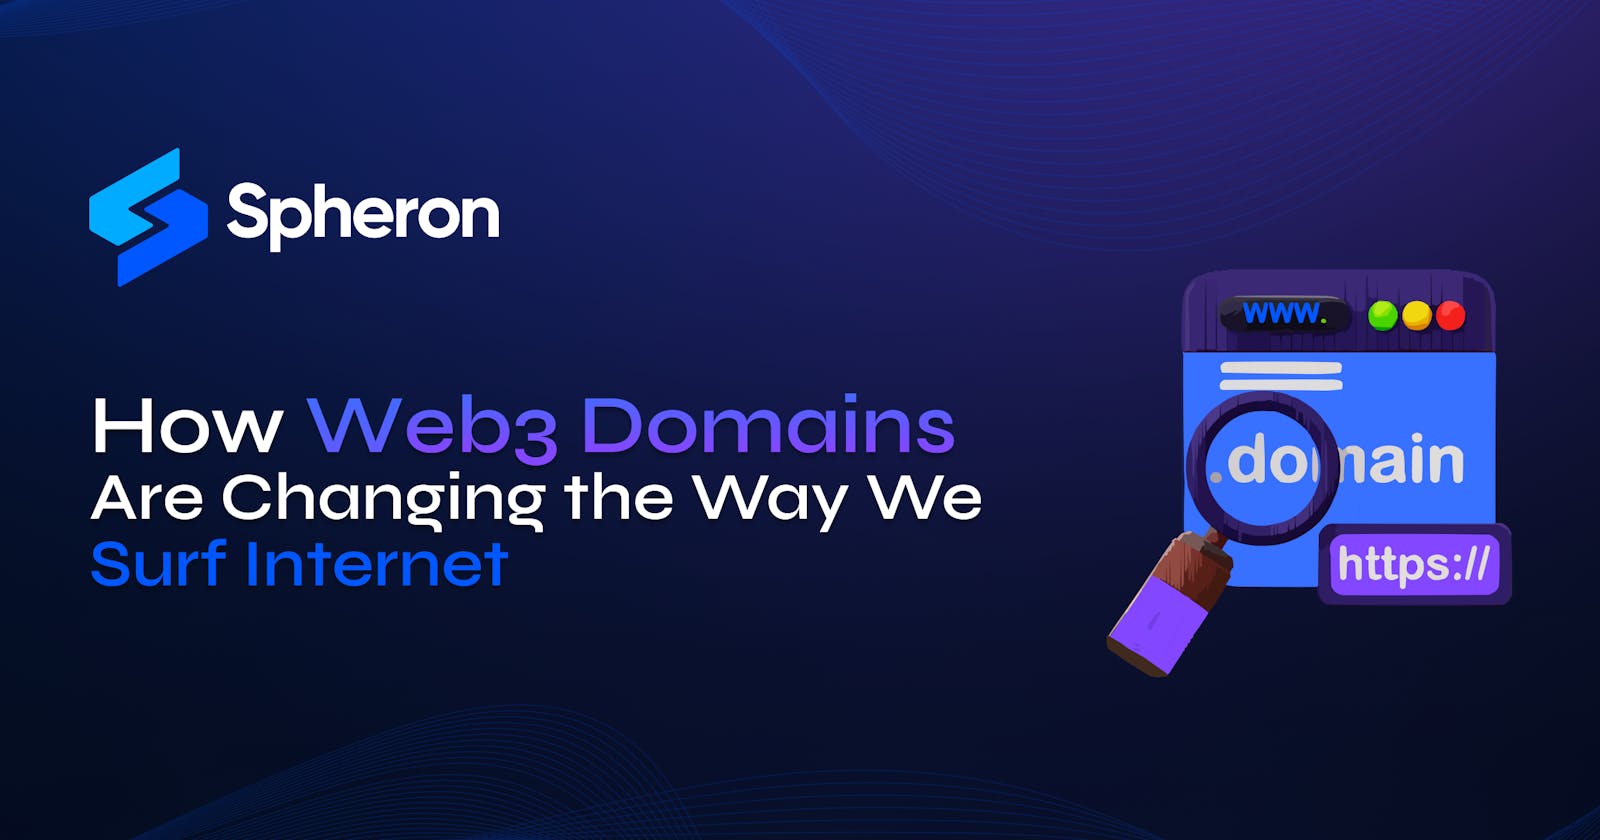 How Web3 Domains Are Changing the Way We Surf Internet